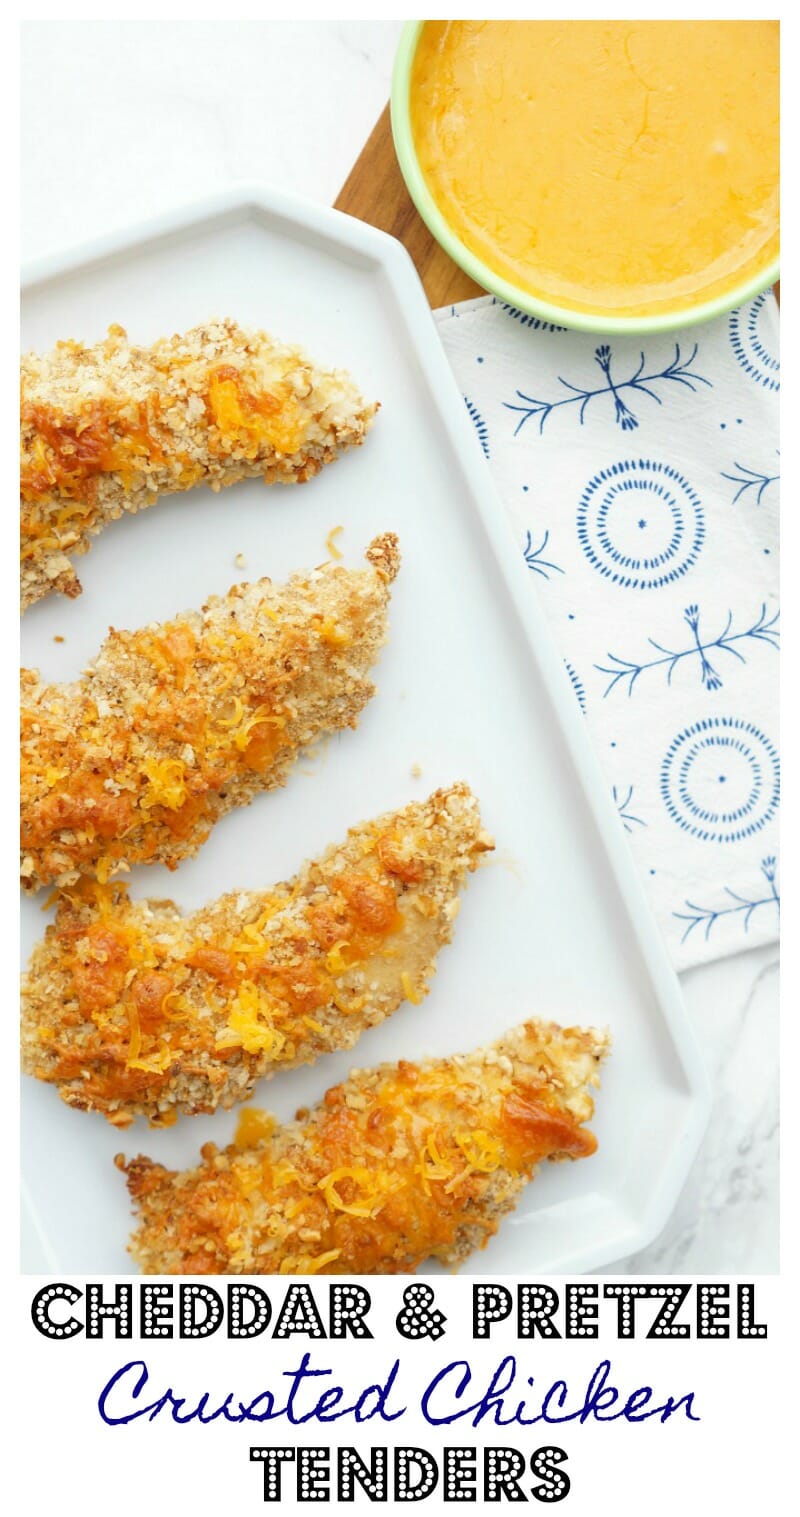 Cheddar and Pretzel Crusted Chicken Tenders 